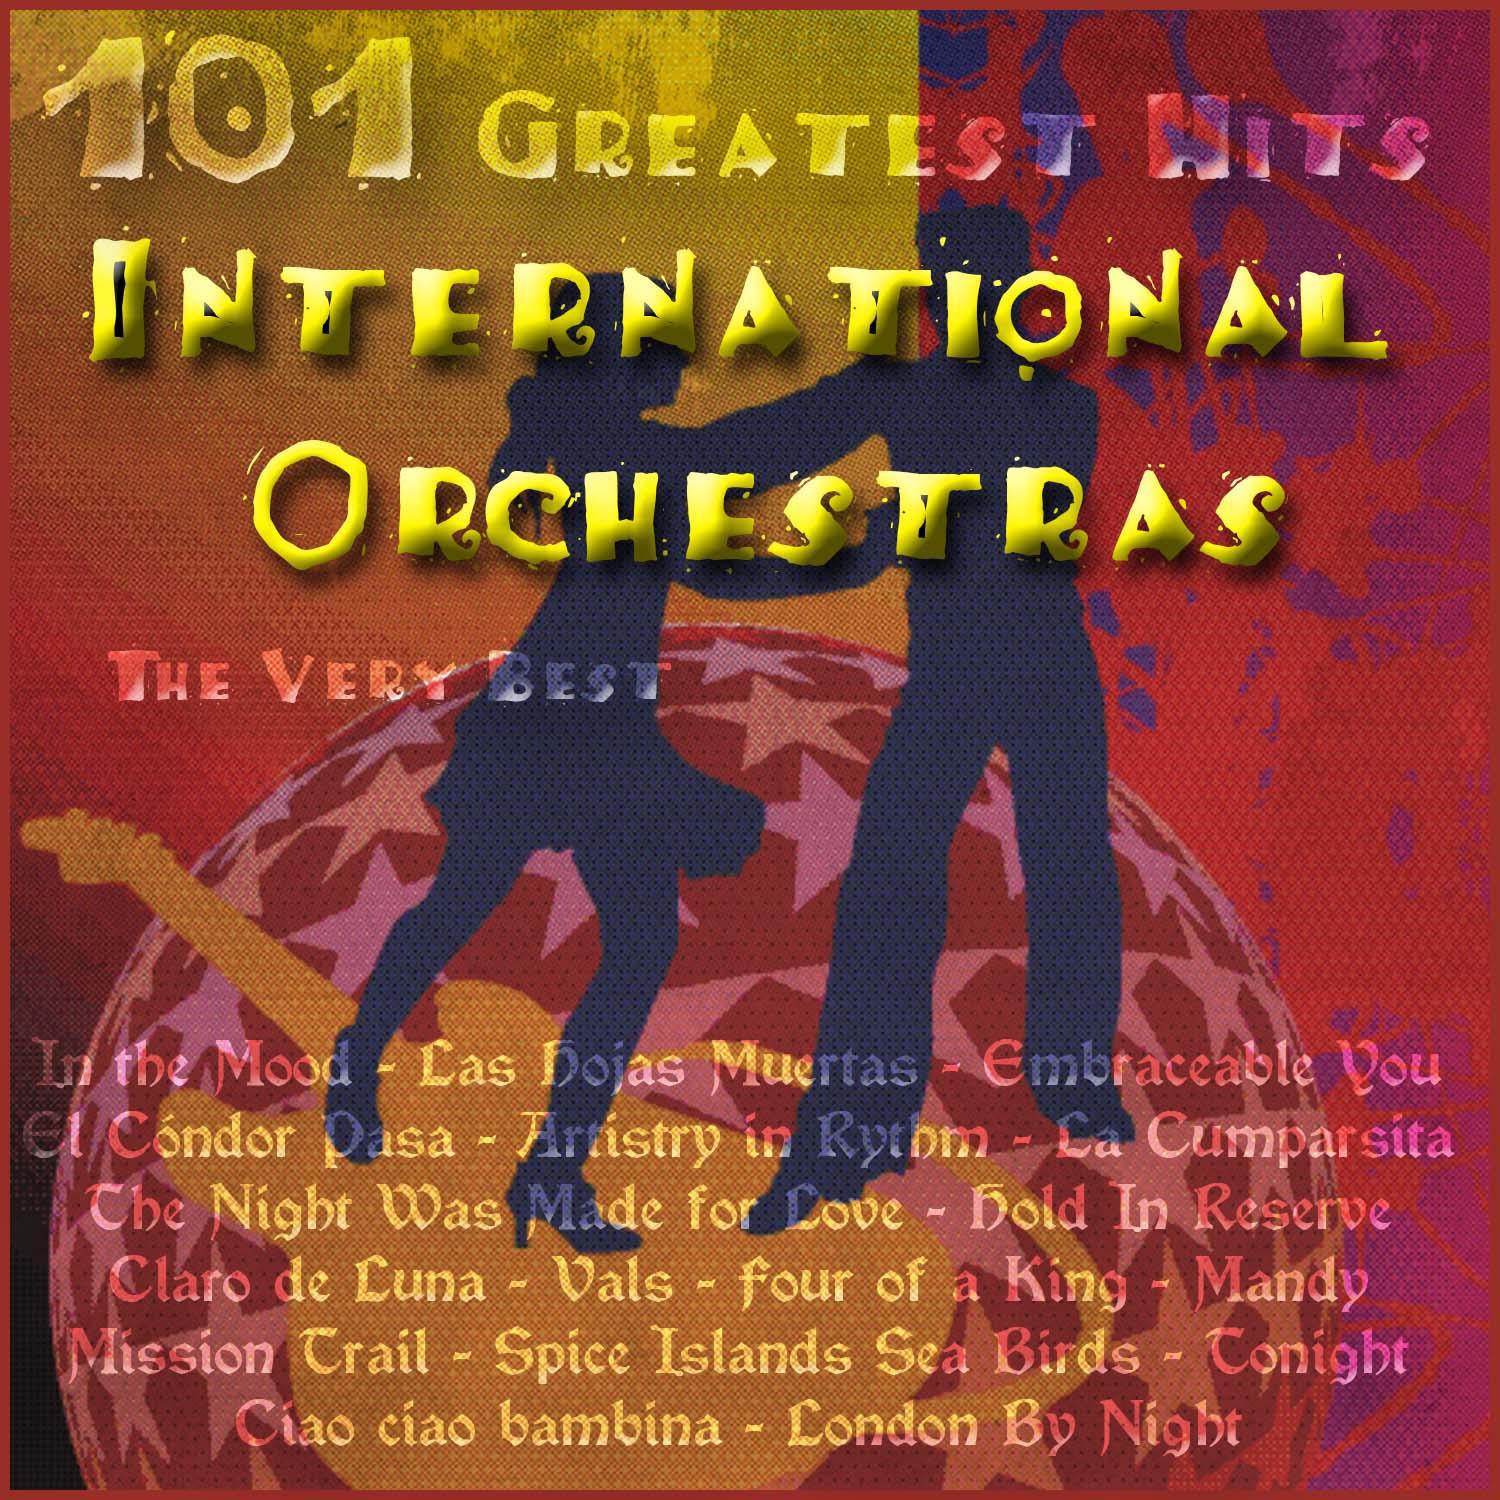 The Very Best International Orchestras - 101 Greatest Hits